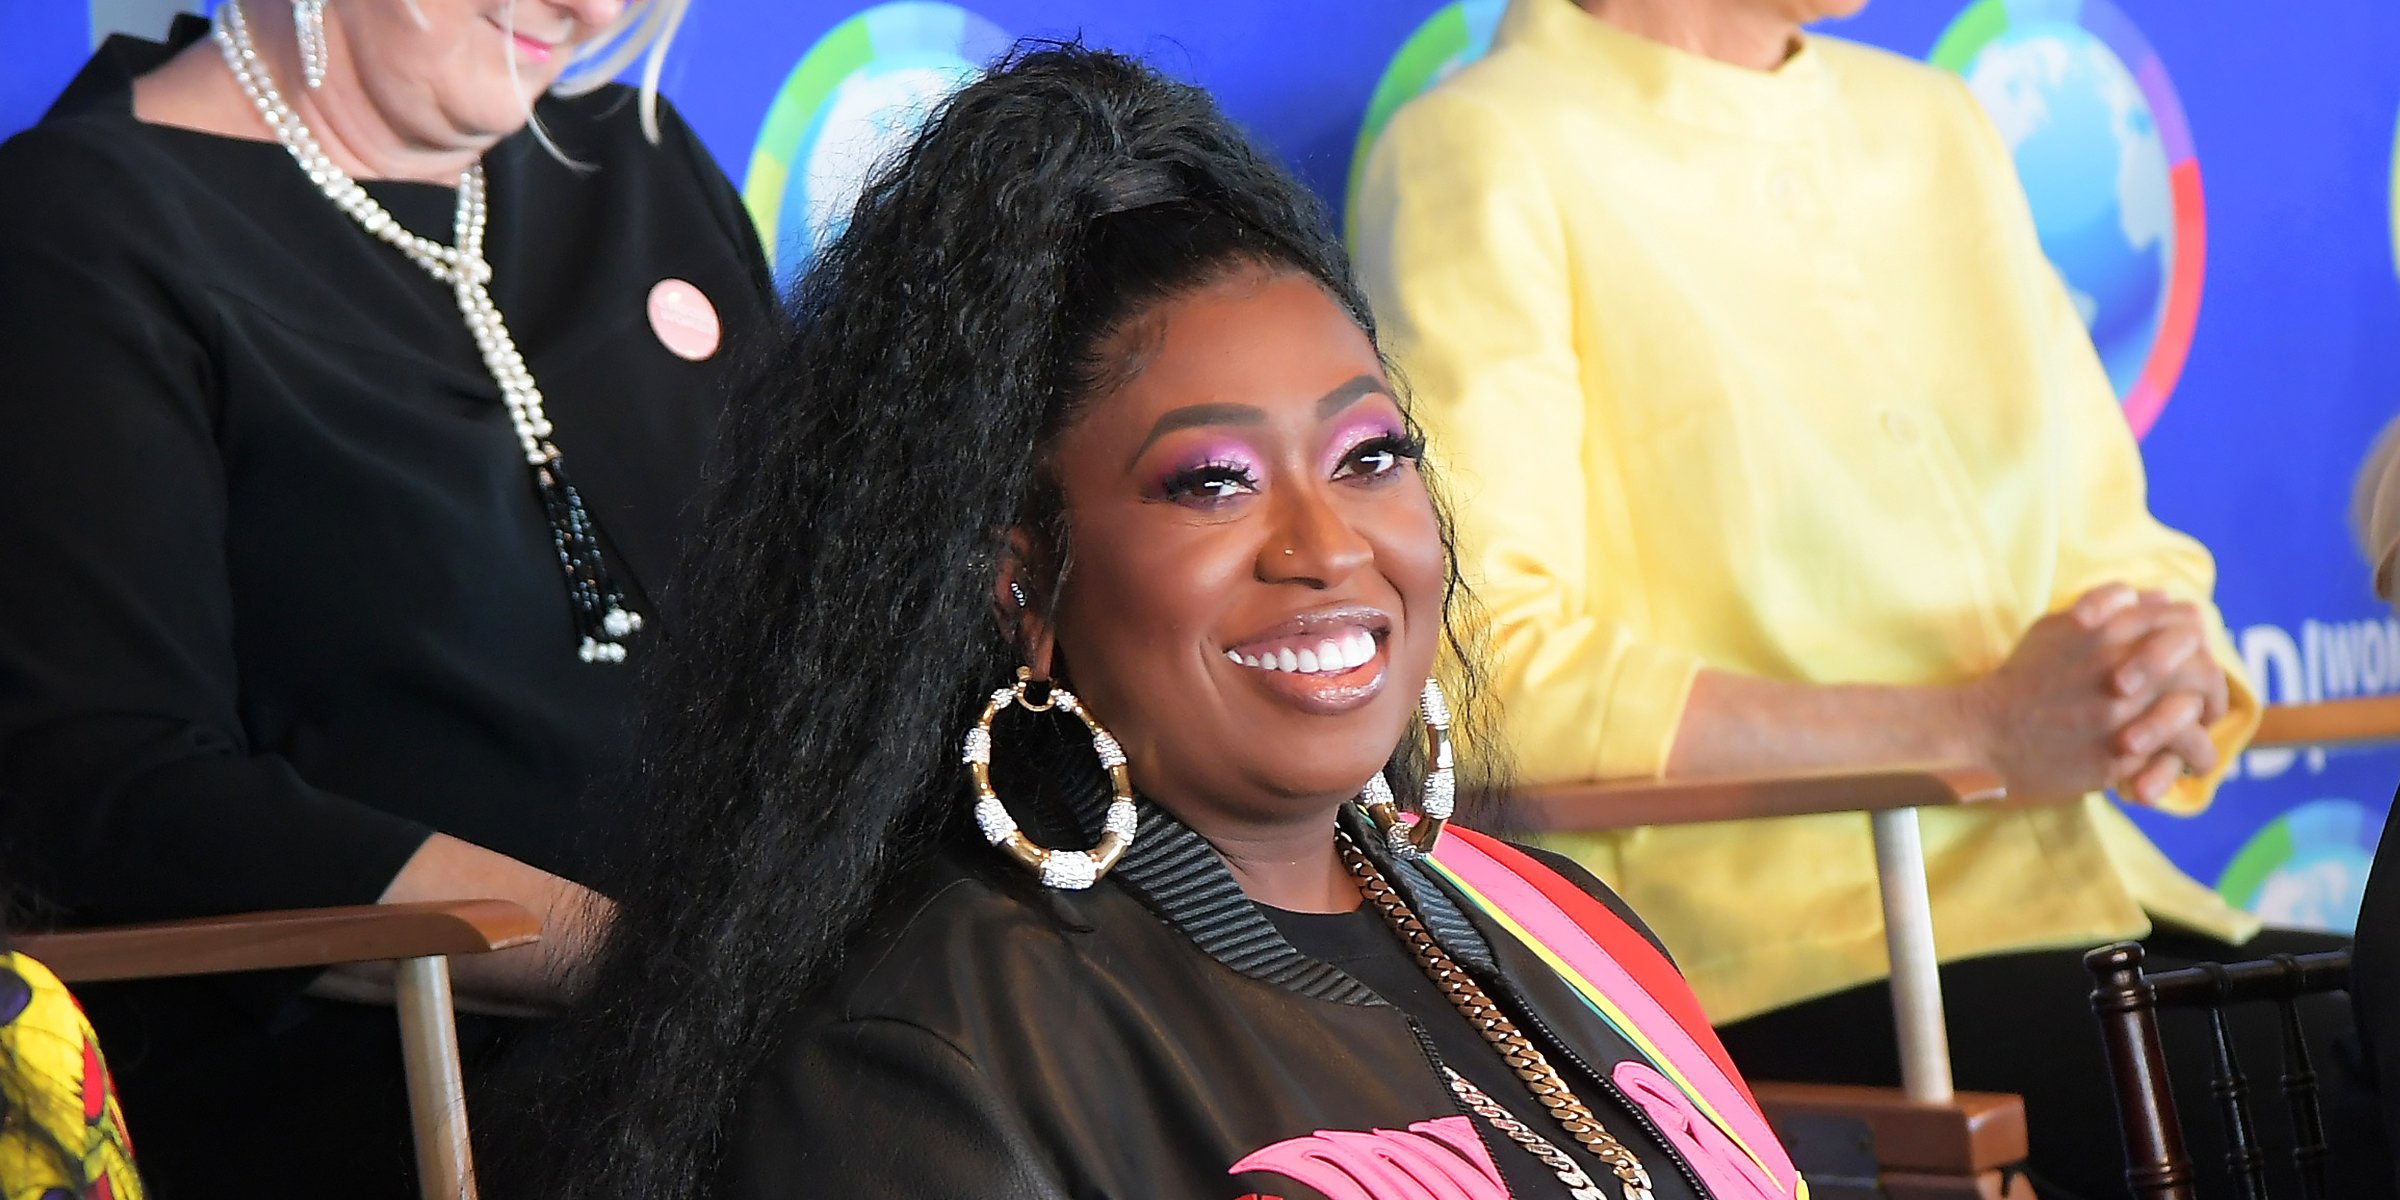 Does Missy Elliott Have a Husband? Inside the Star's Love Life